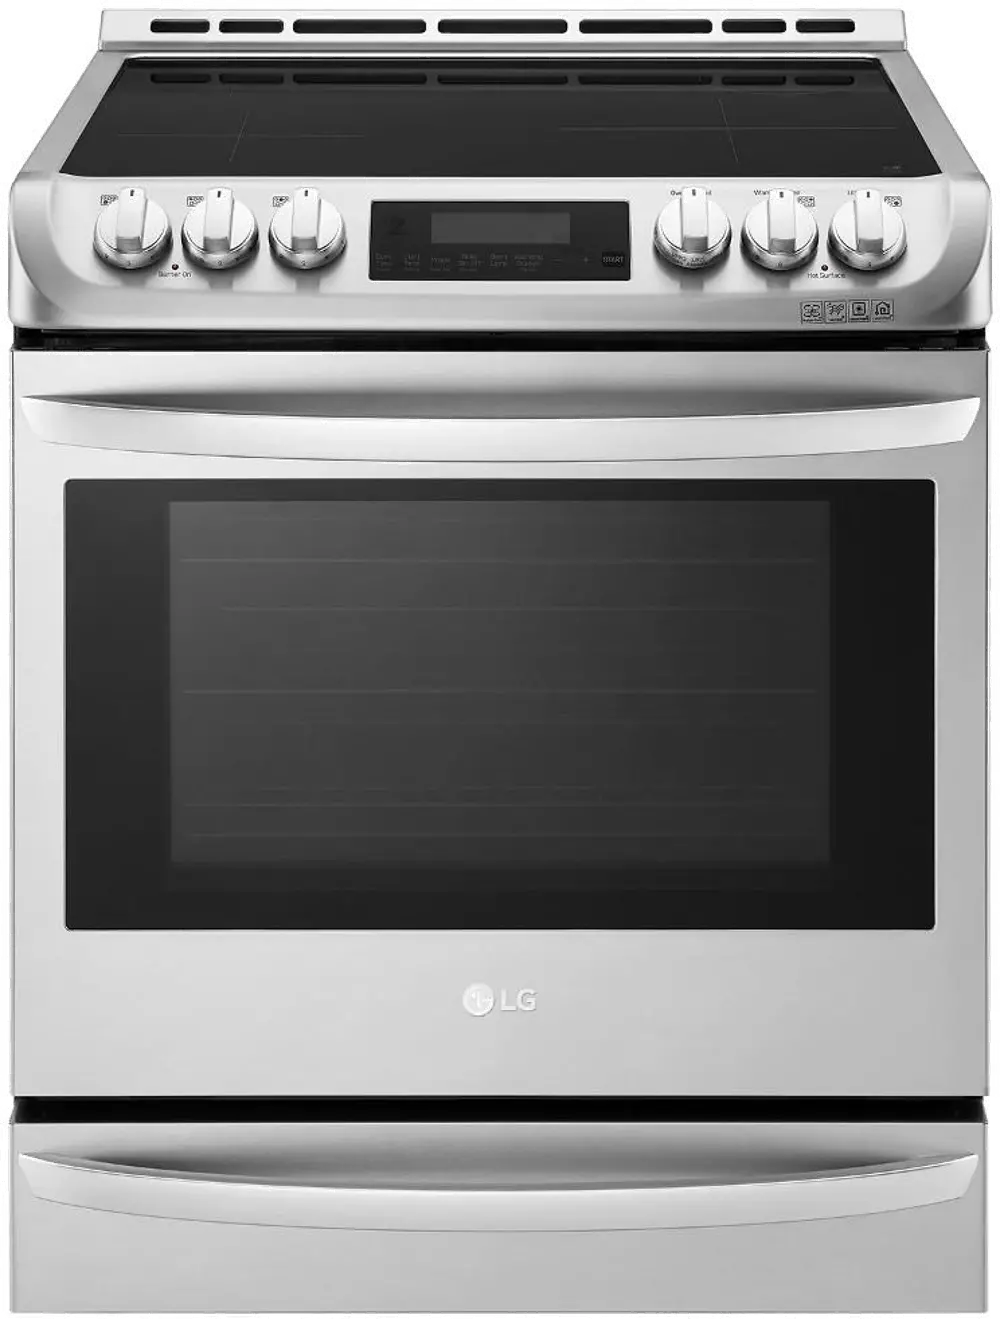 LSE4617ST LG 6.3 cu ft Induction Range - Stainless Steel-1